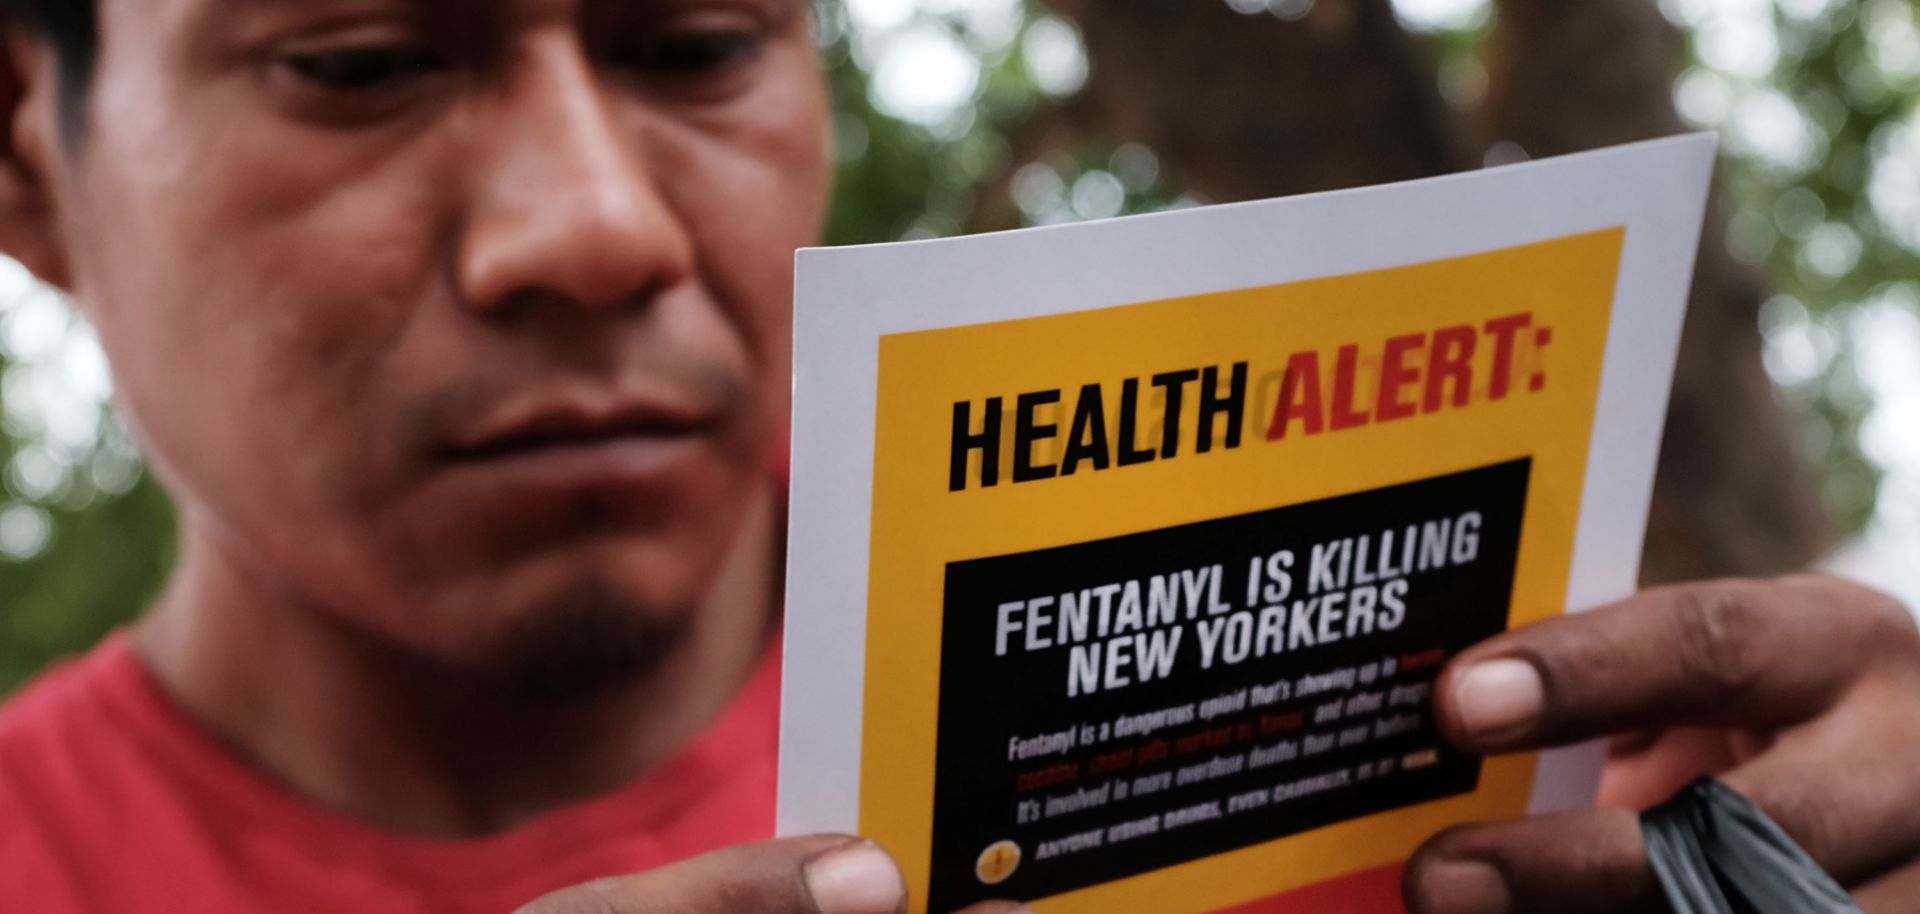 The powerful synthetic opioid fentanyl is responsible for a rash of overdose deaths in the United States